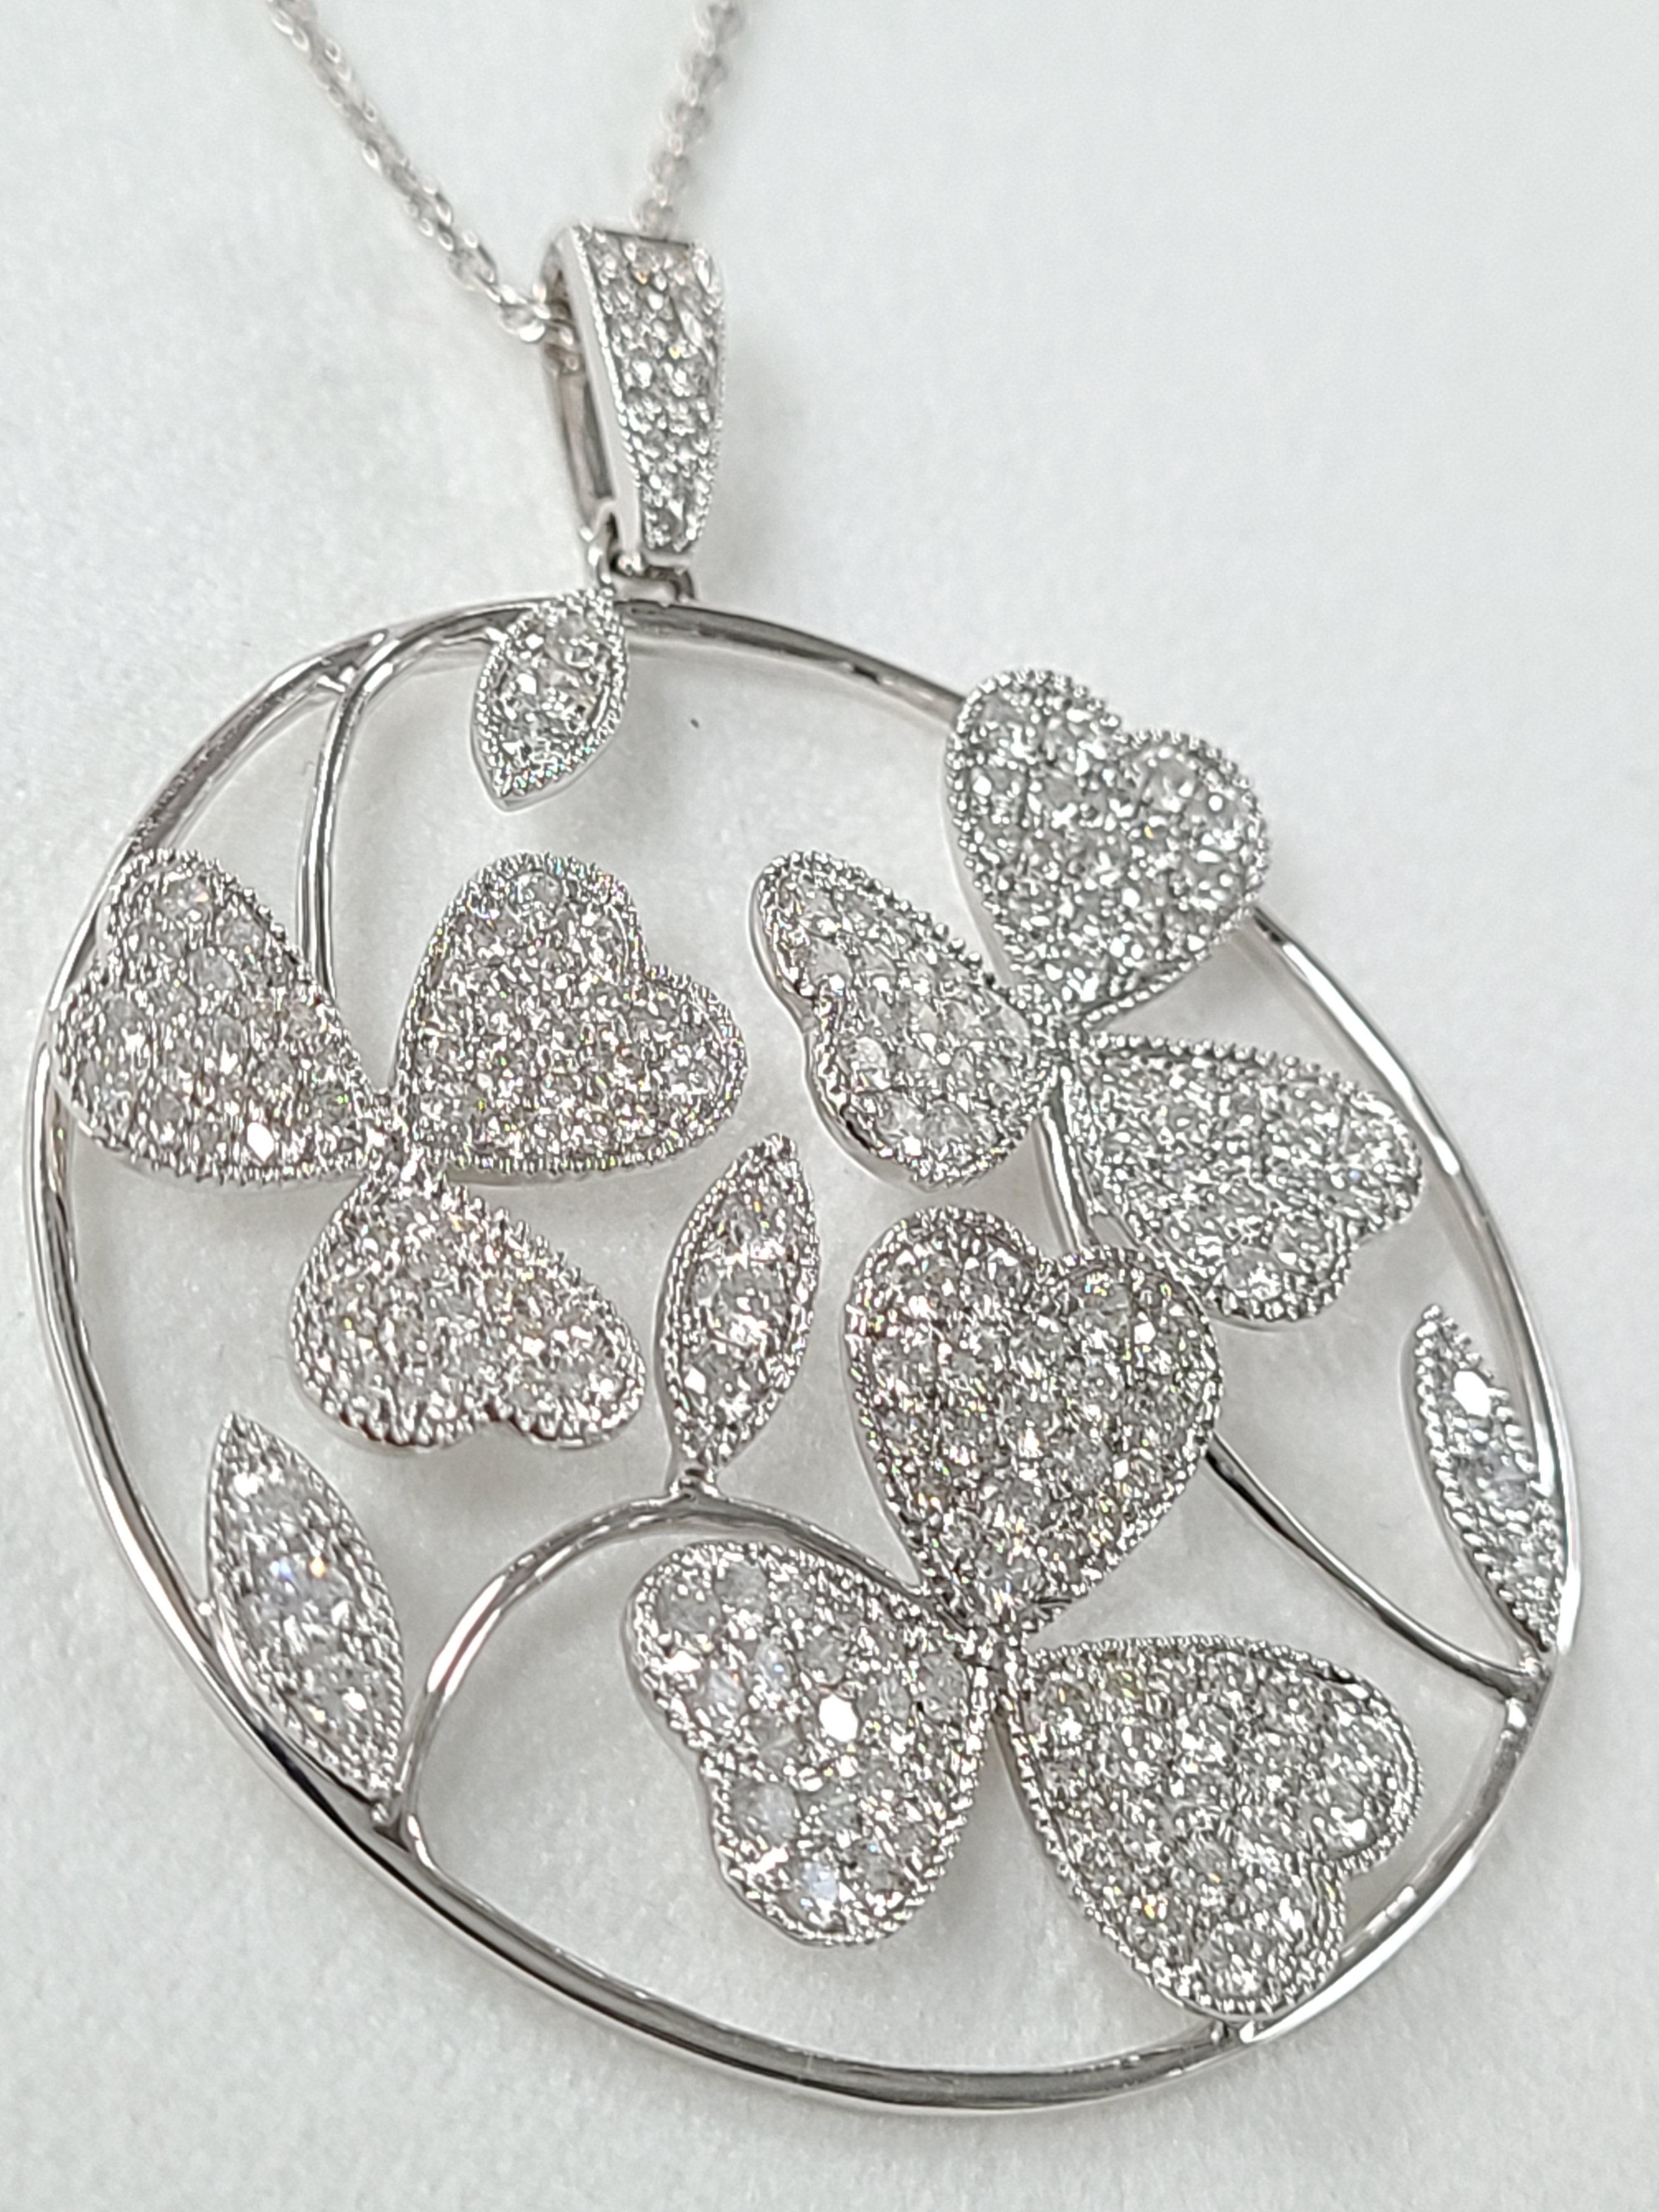 A gorgeous Diamond pendant made with high quality Craftsmanship ! The pendant is made in such a way that it gives sort of a 3D look . The diamond weight in the pendant is 2 carats . The chain's length can be changed with a simple ball mechanism .